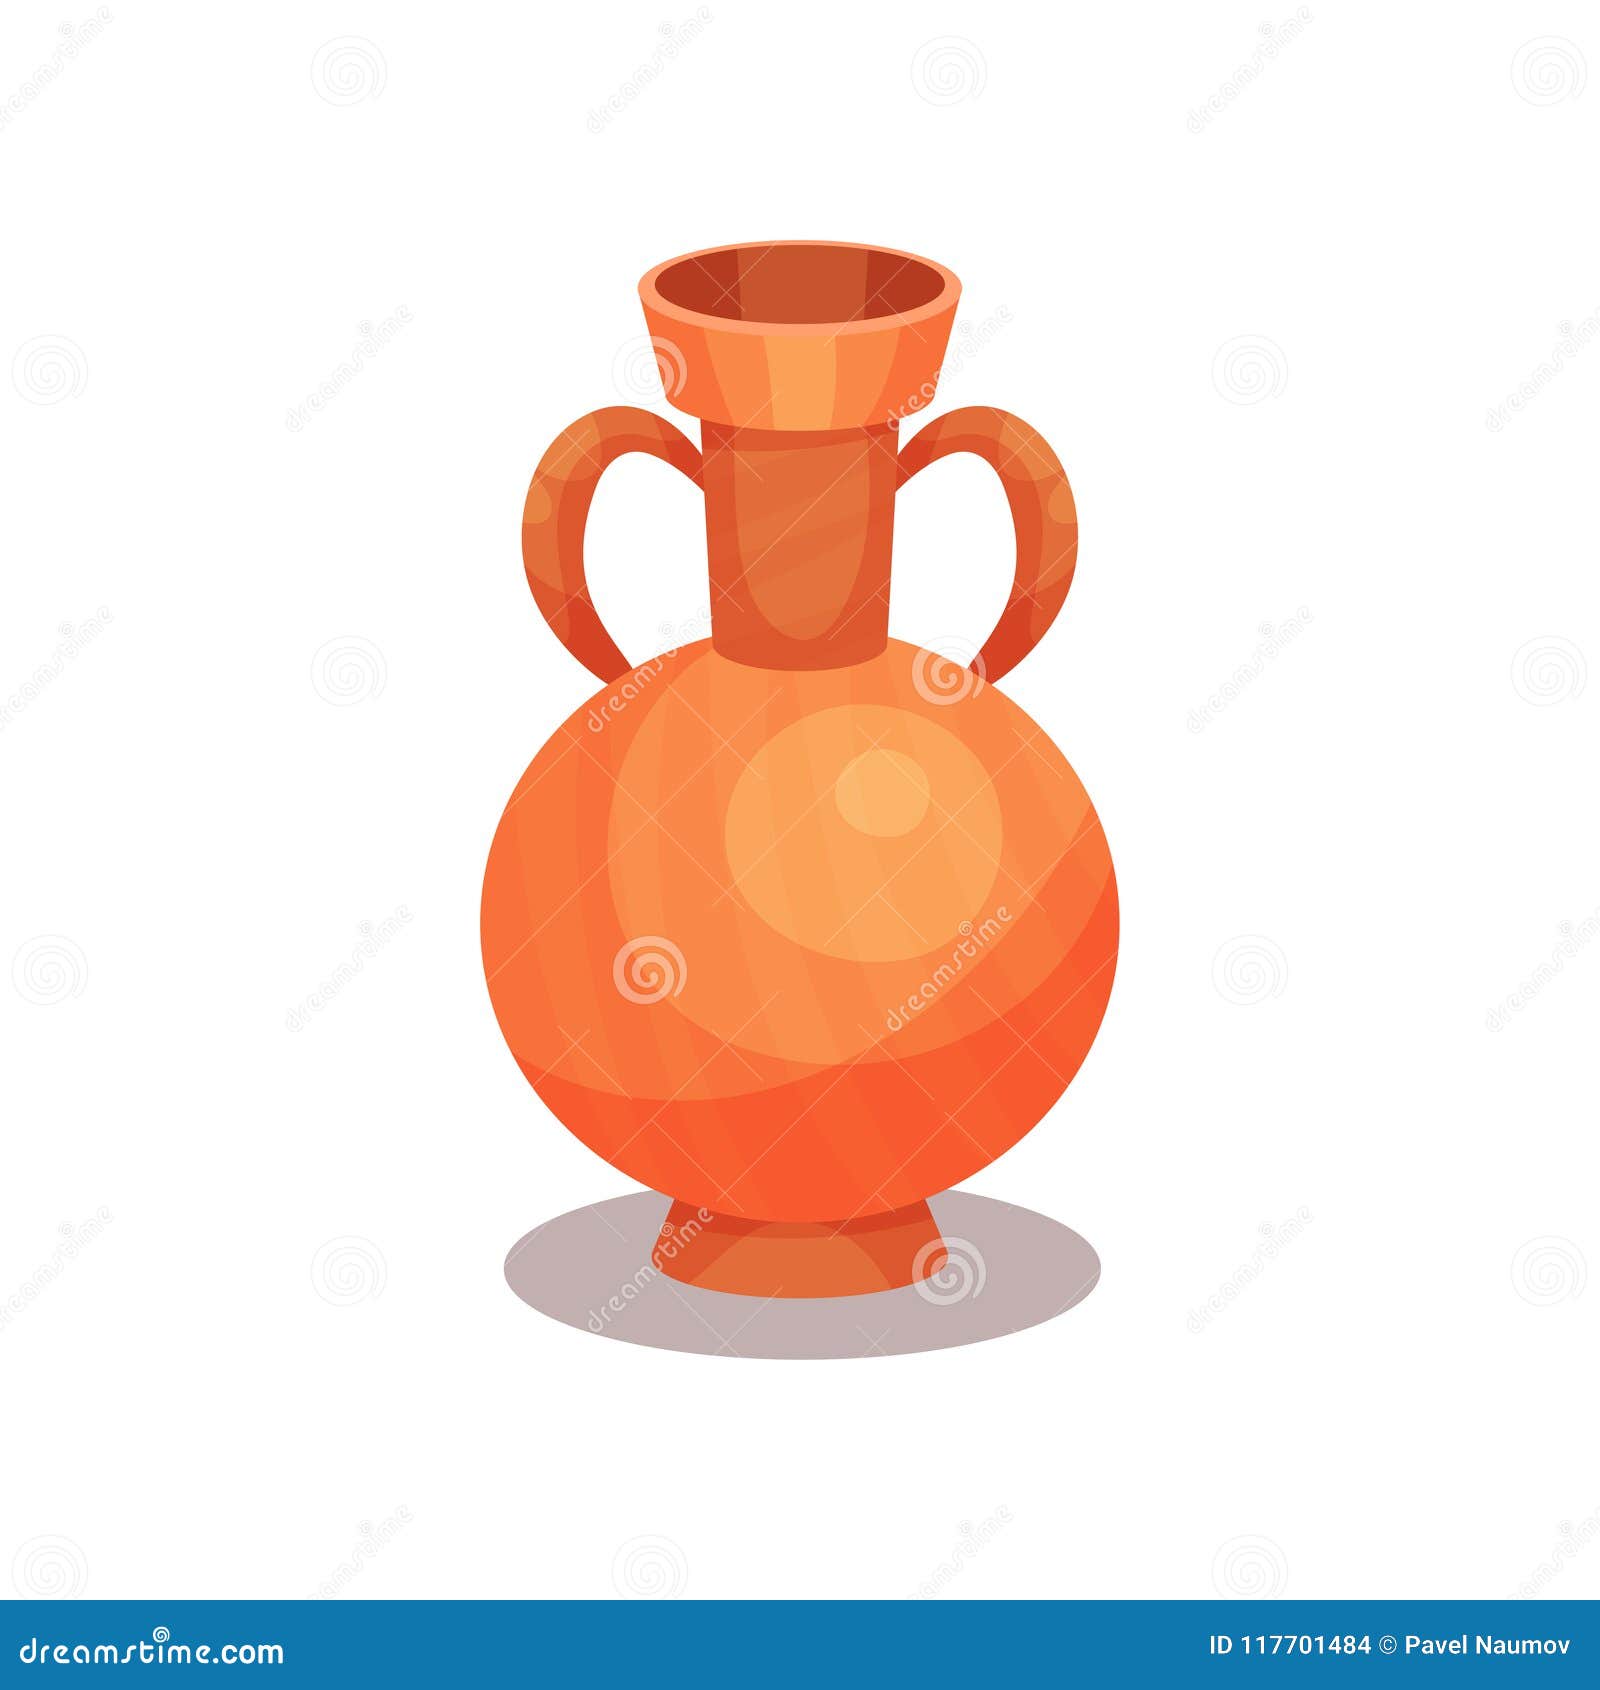 Flat Vector Icon Of Ancient Amphora With Two Handles And Narrow Neck